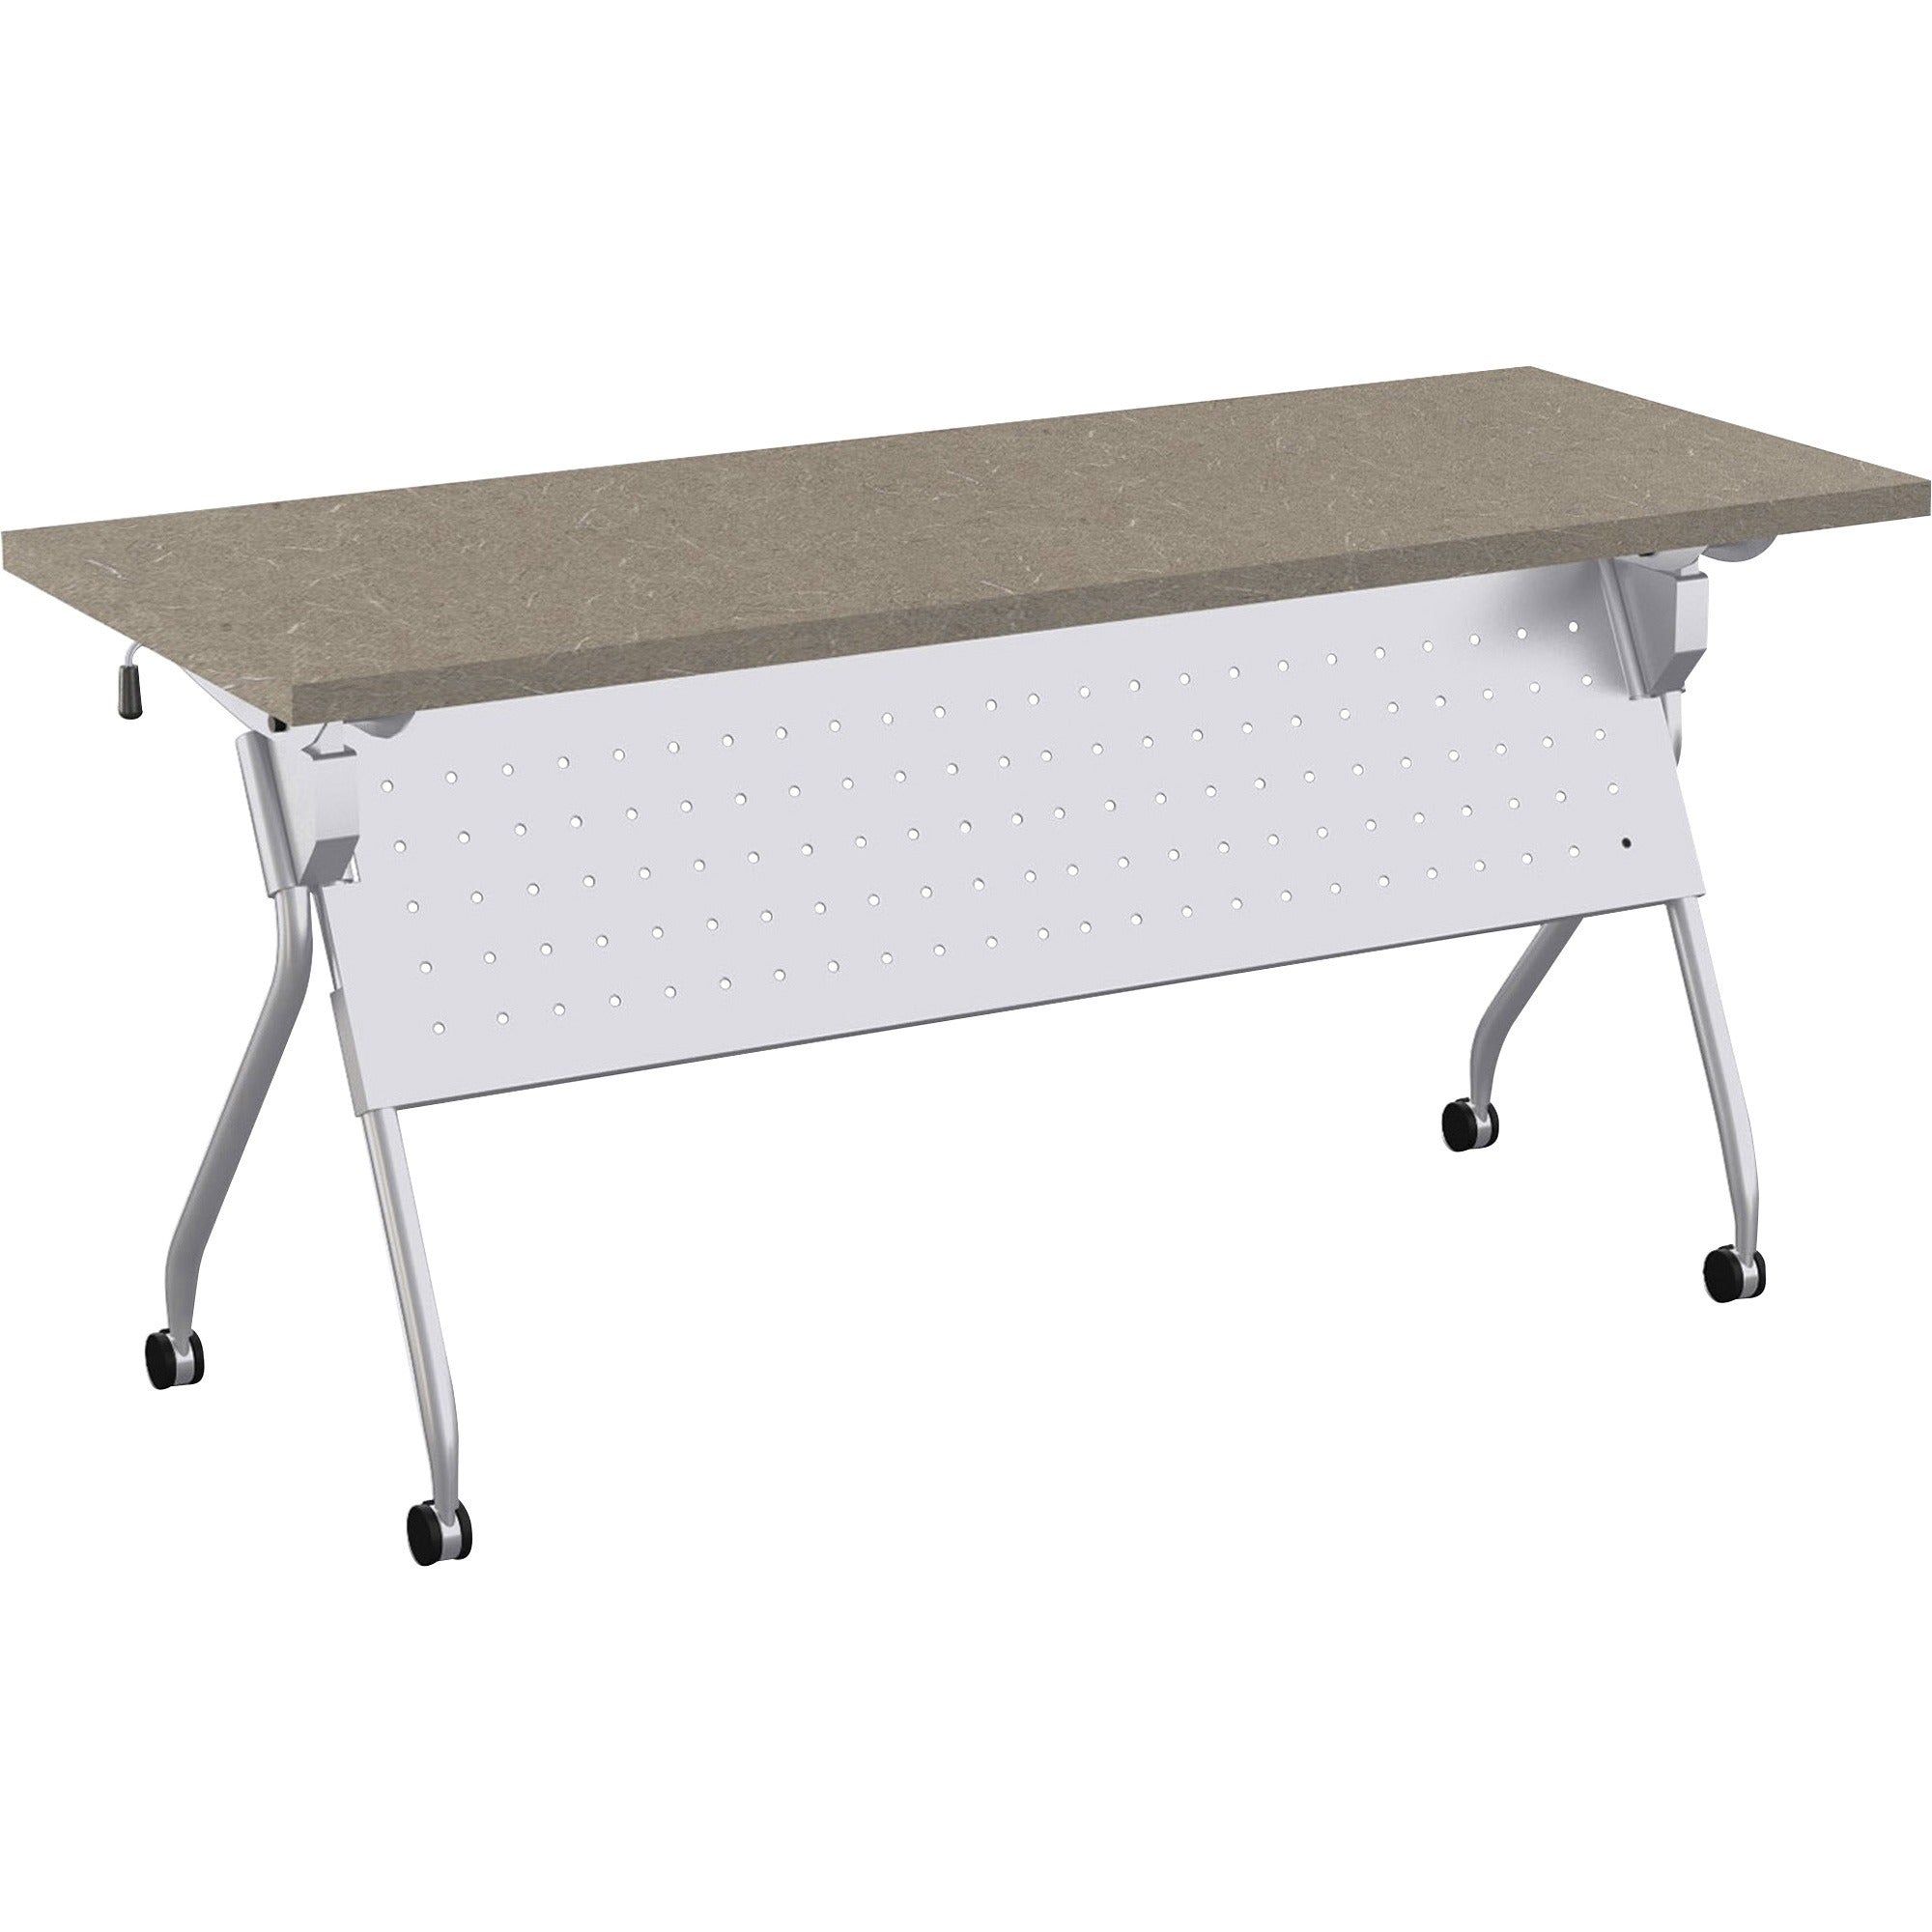 special-t-transform-2-flip-&-nest-table-112-lb-capacity-30-height-x-60-width-x-24-depth-assembly-required-silver-evening-tigris-perforated-steel-high-pressure-laminate-hpl-1-each_scttrnf22460set - 1